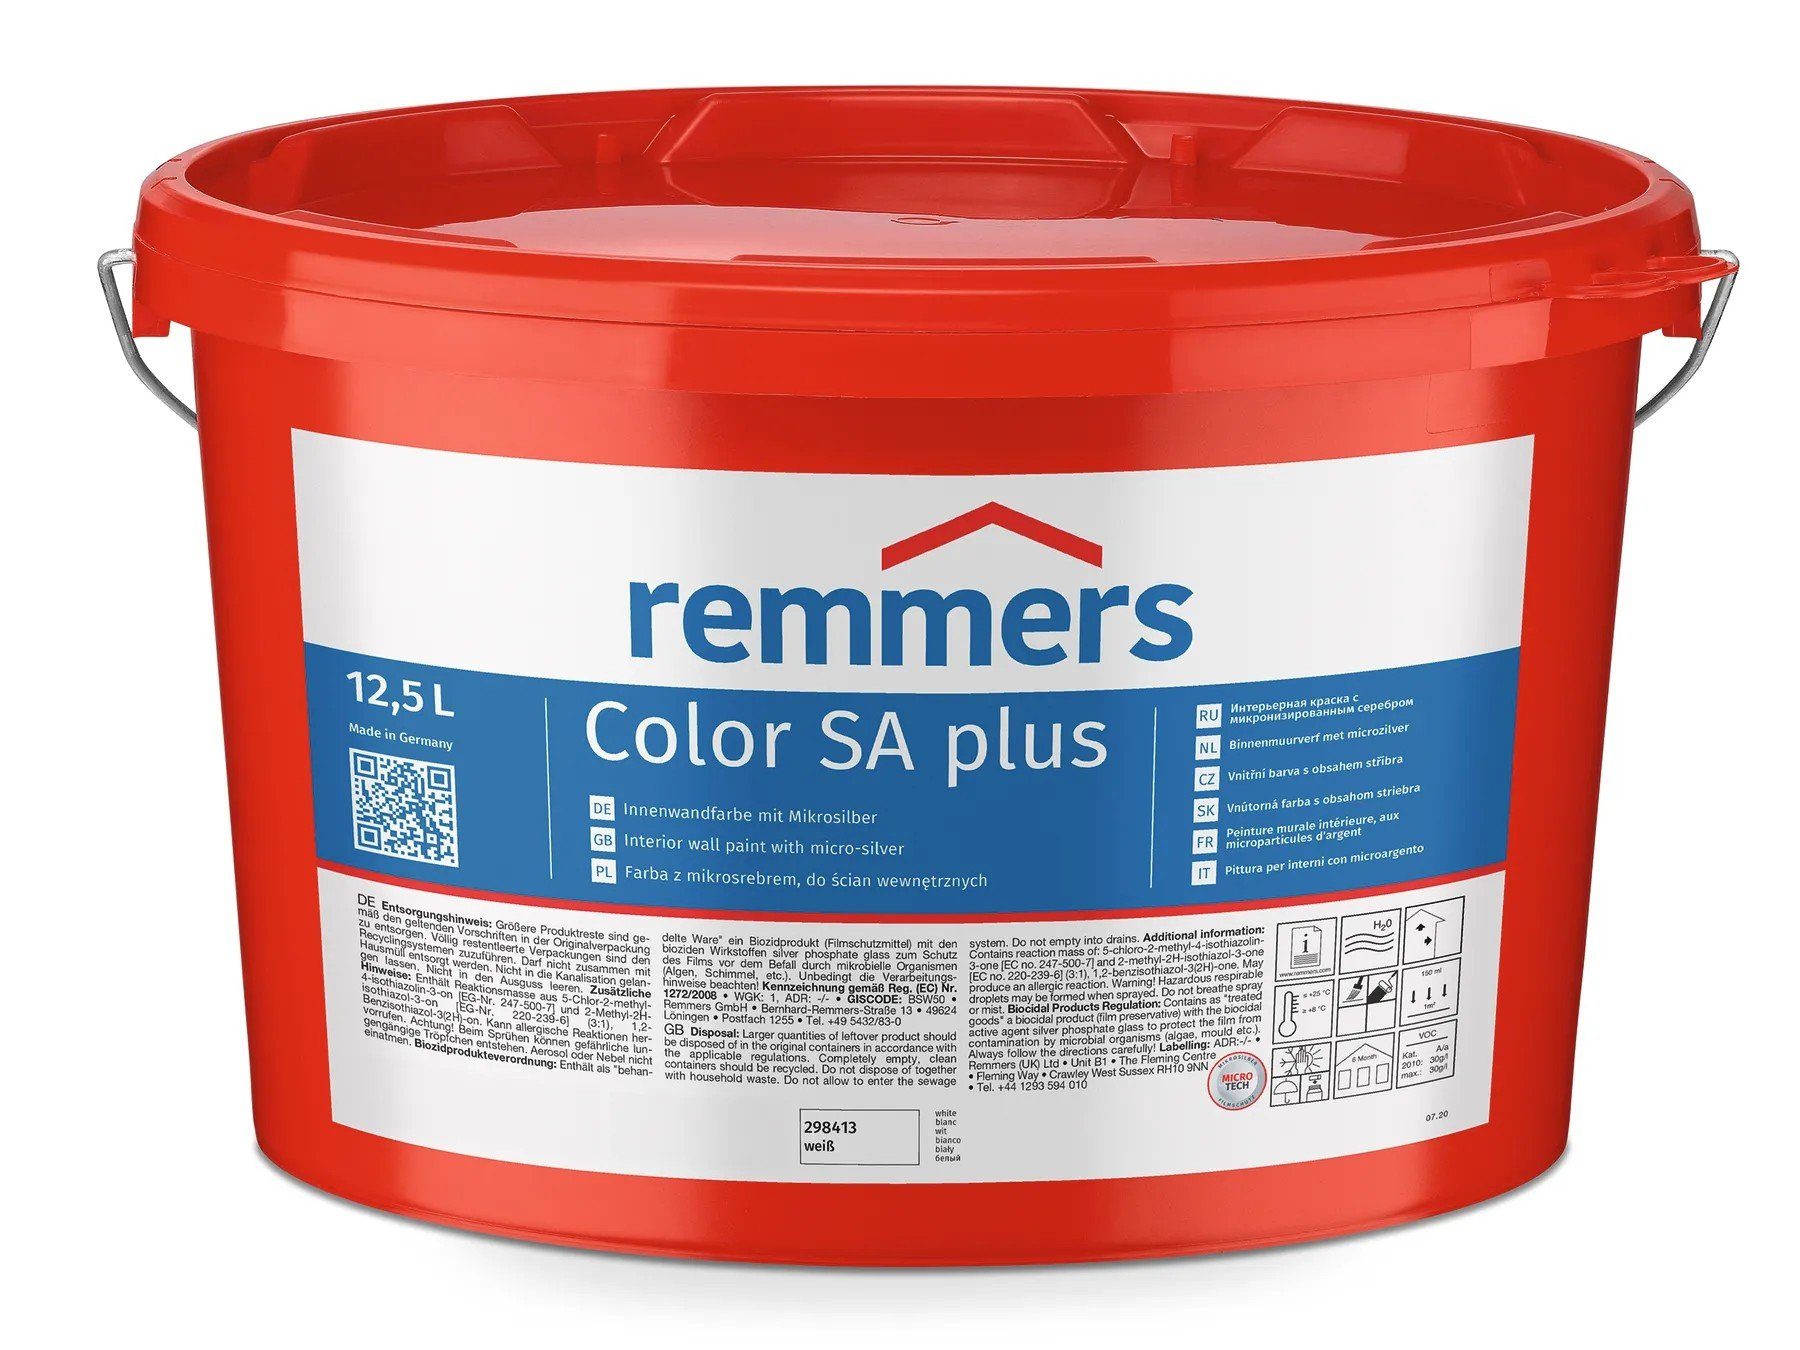 Remmers Wandfarbe Color SA plus